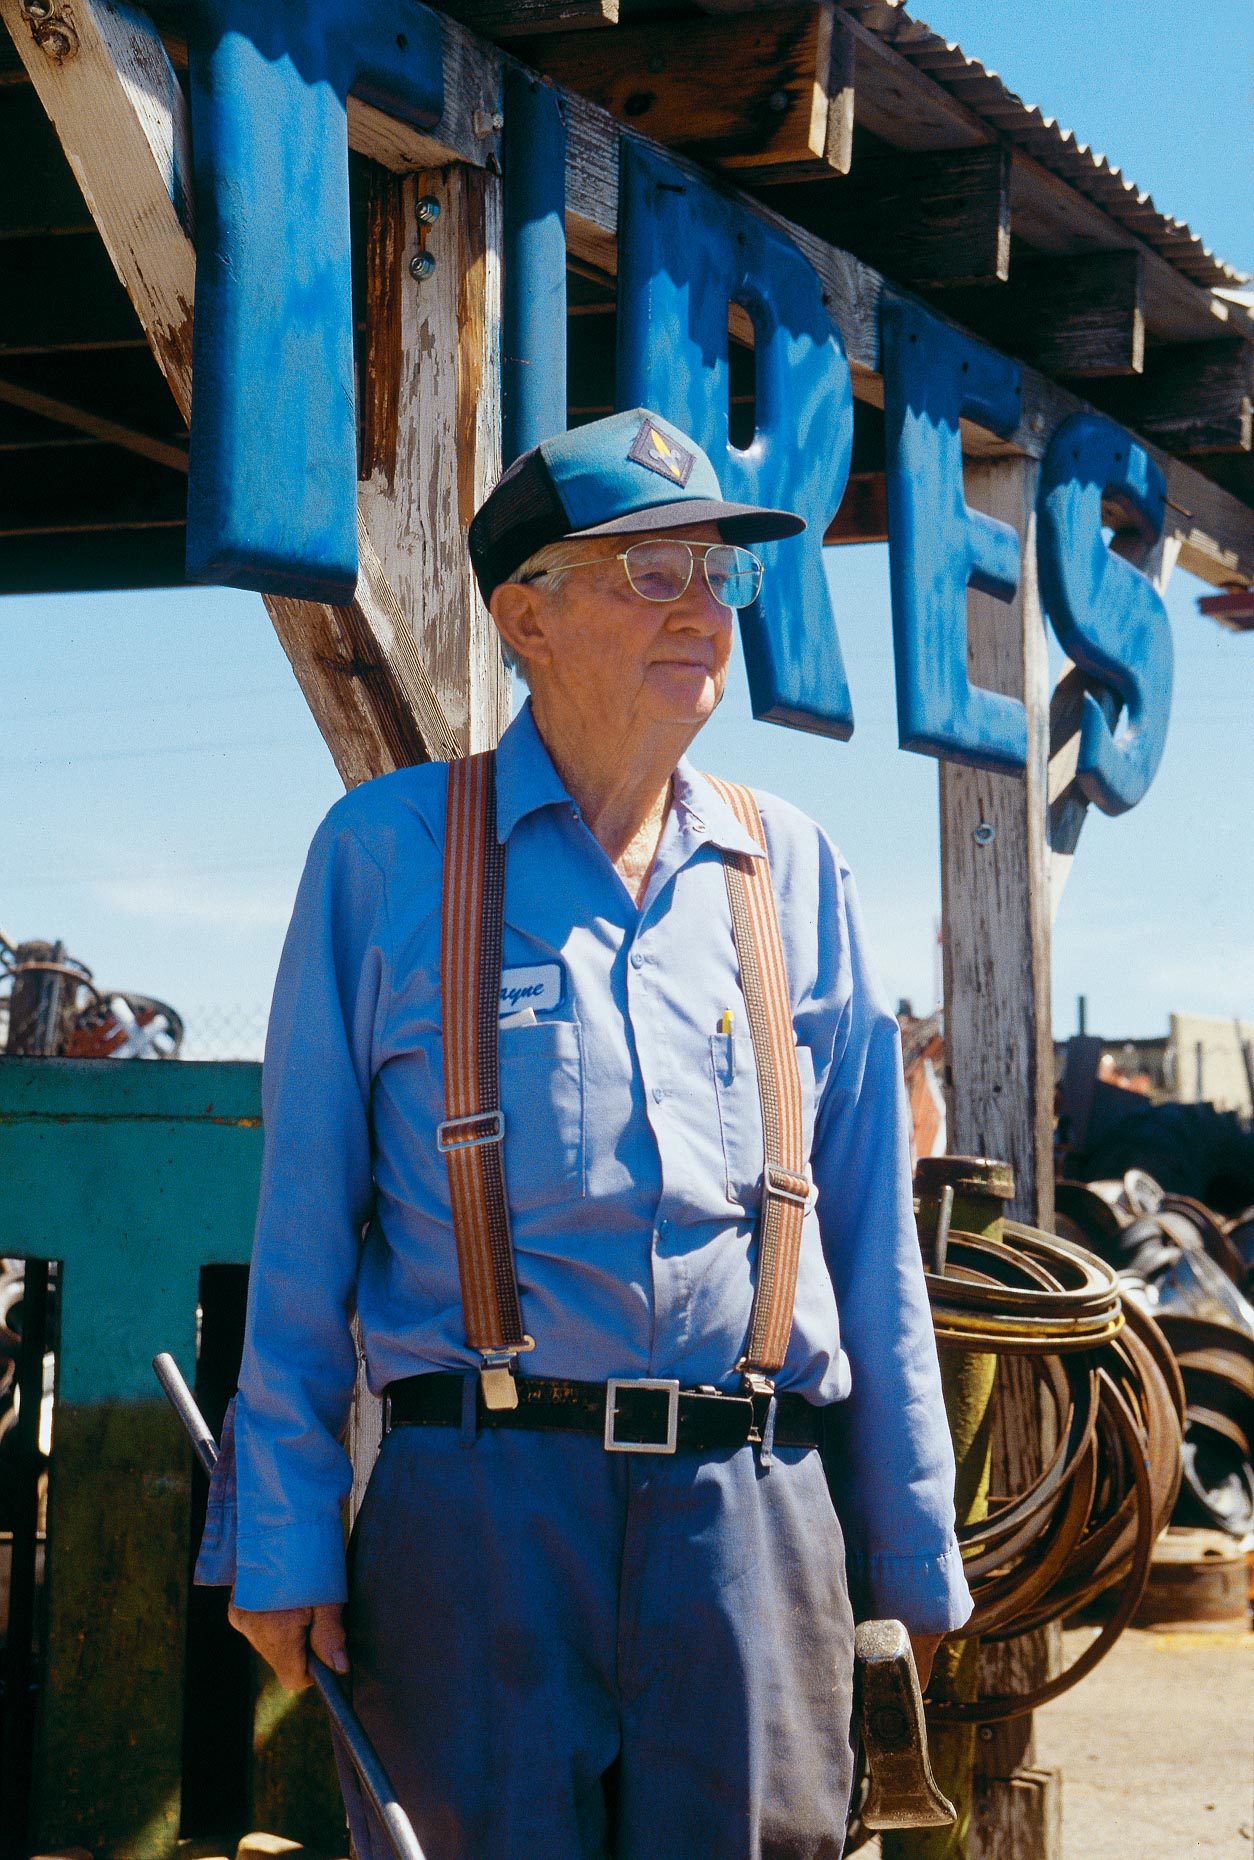 Environmental portrait of man wearing suspenders and blue uniform standing in front of TIRES sign at a tire shop by David Zaitz